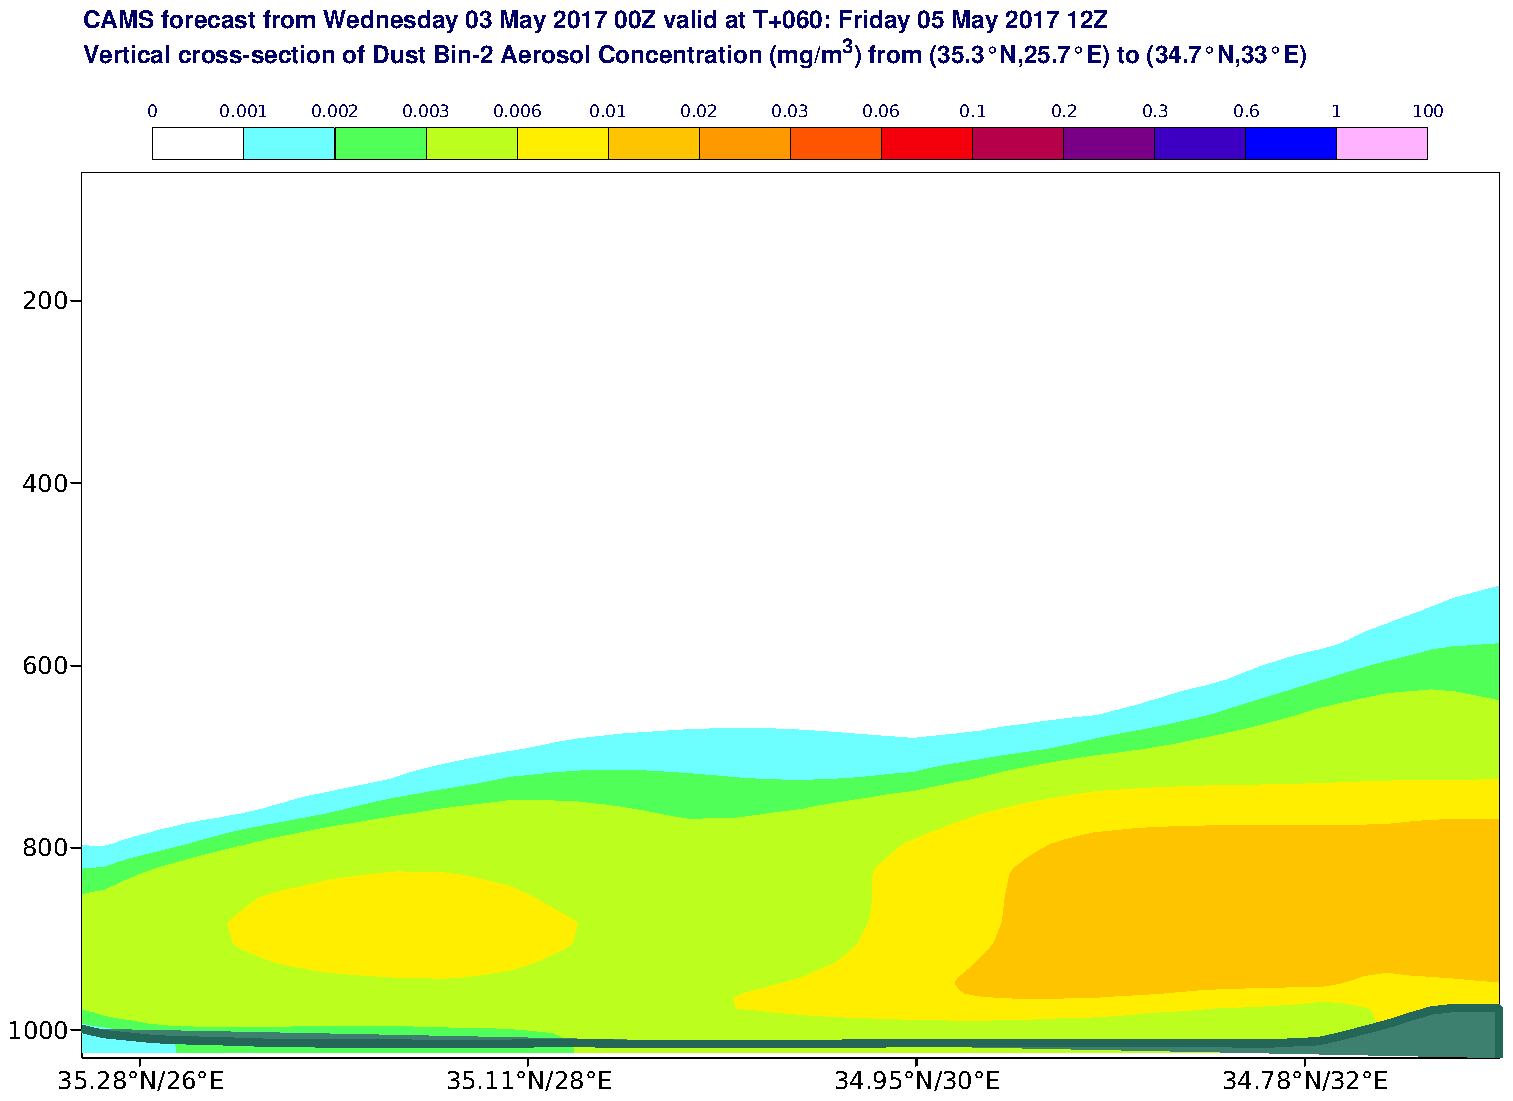 Vertical cross-section of Dust Bin-2 Aerosol Concentration (mg/m3) valid at T60 - 2017-05-05 12:00